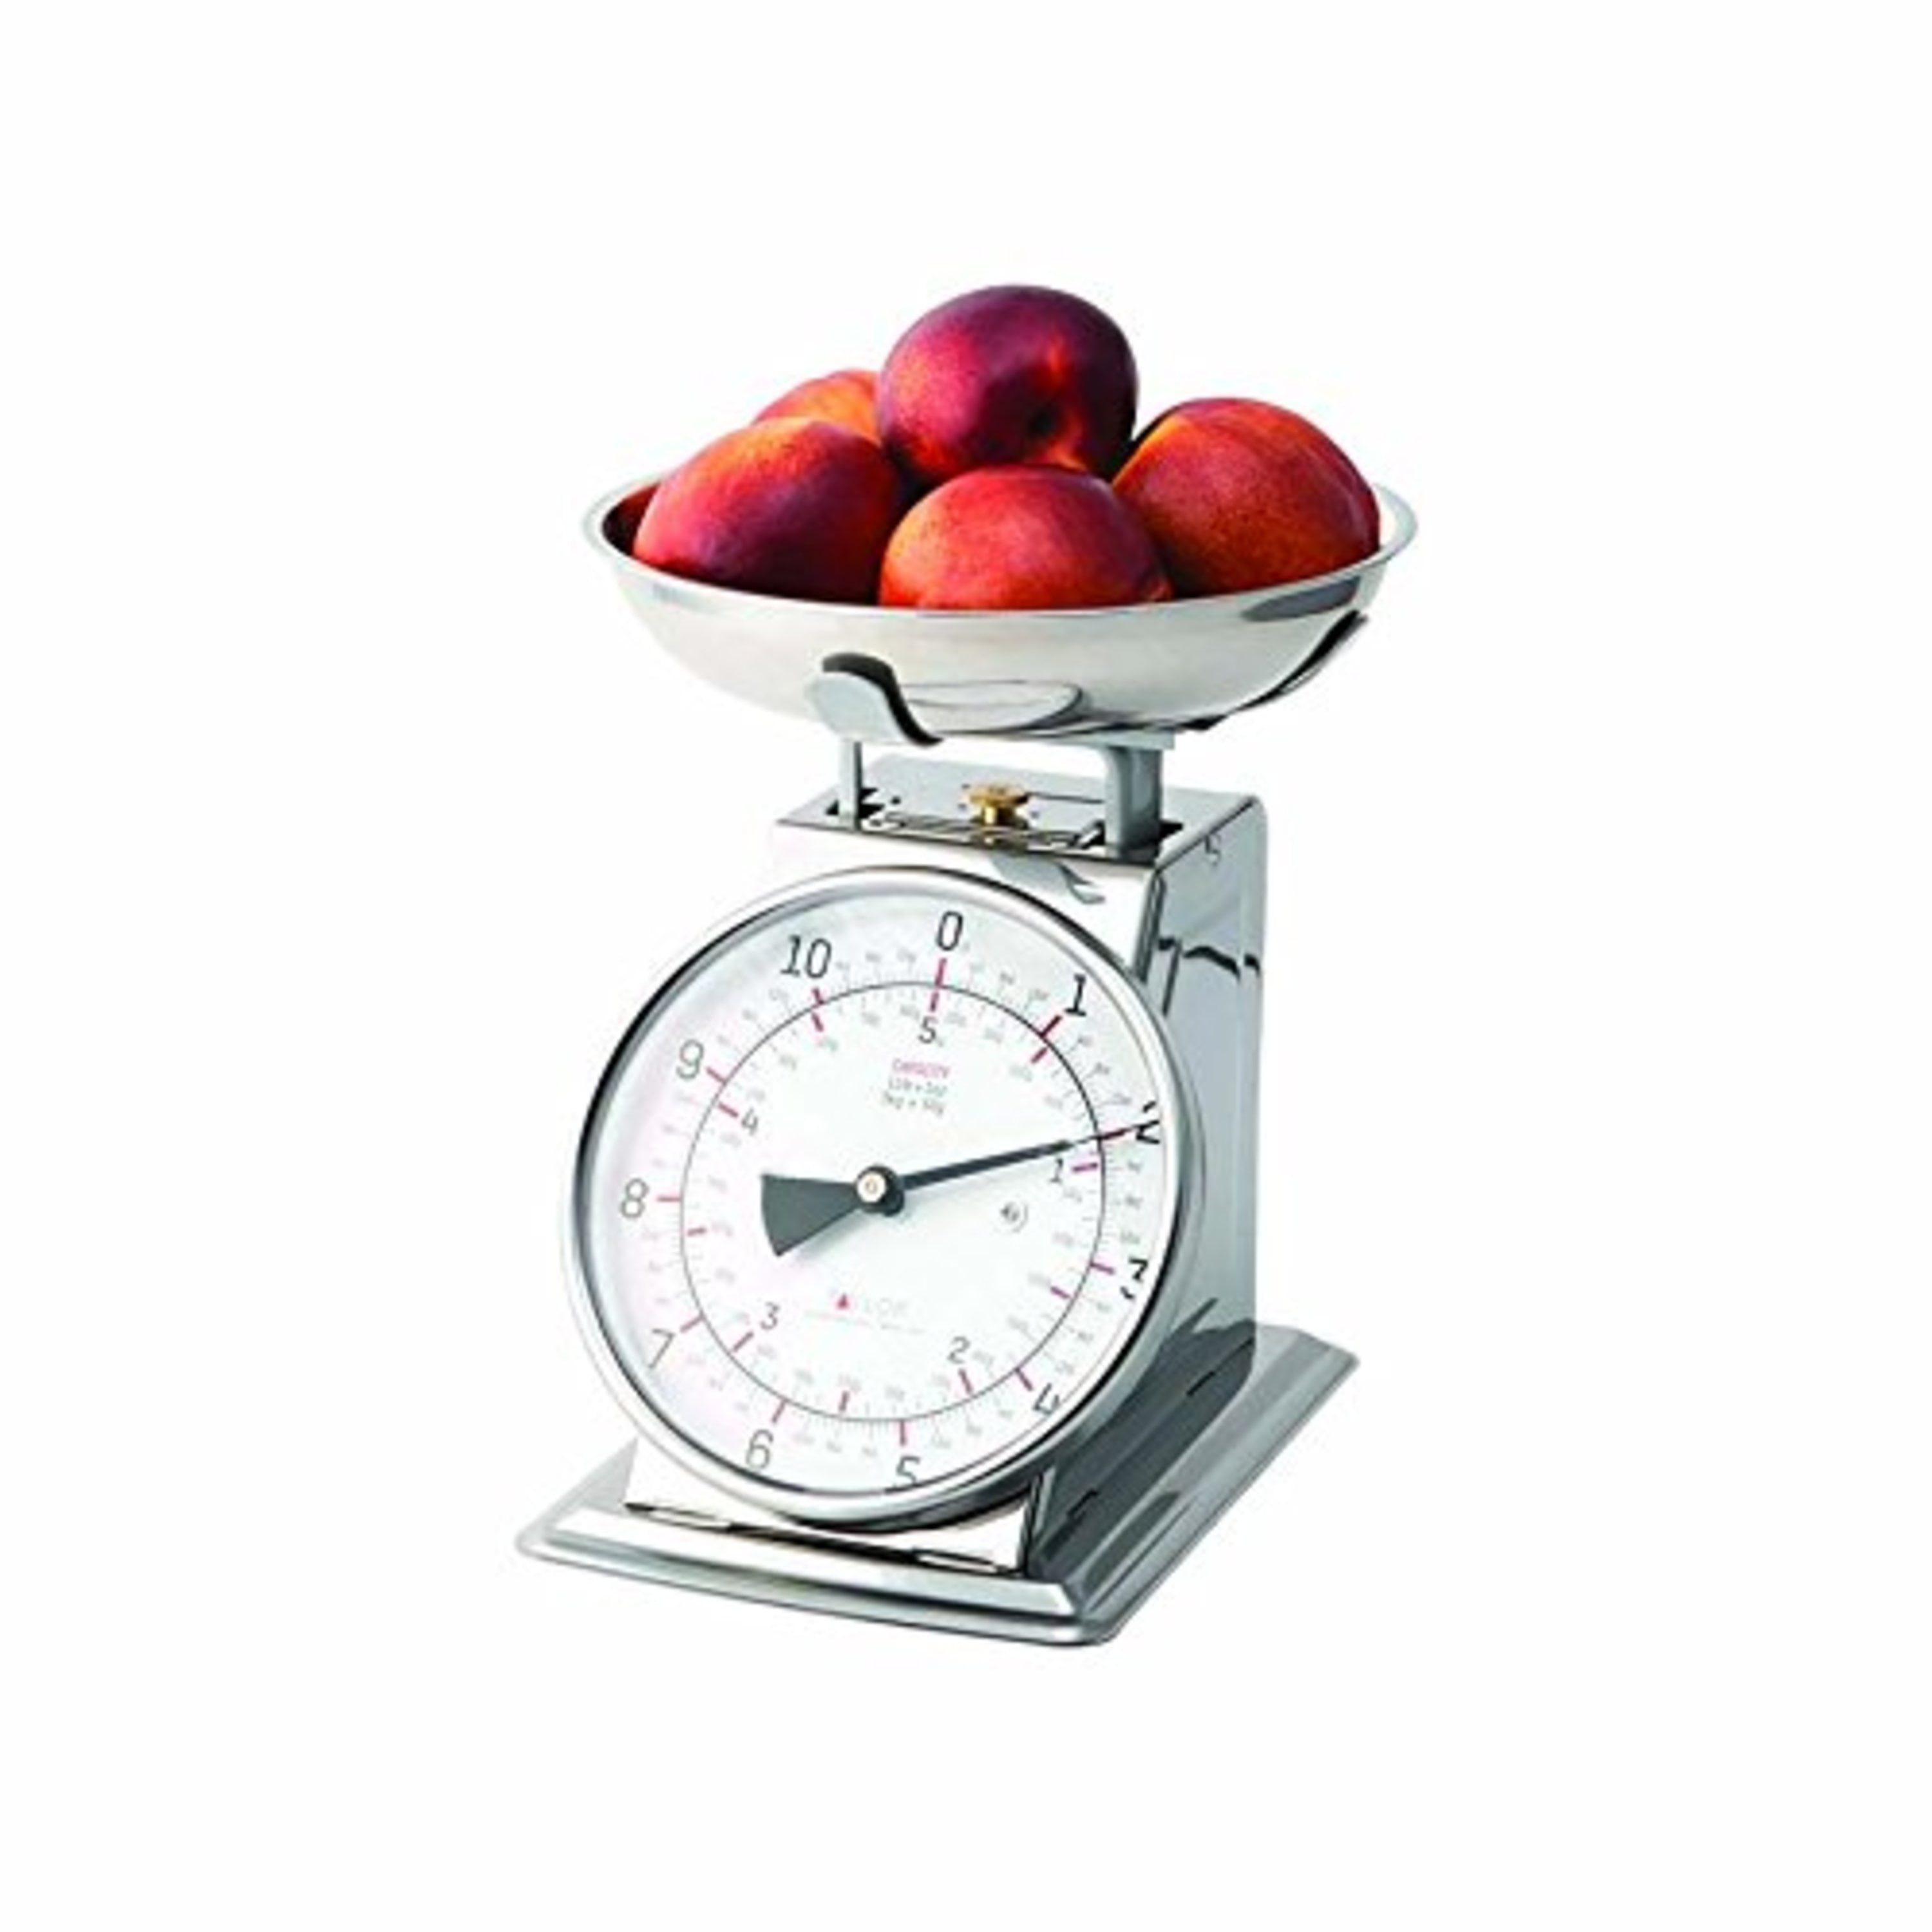 Taylor 11 lb. Capacity Digital Food Scale at Tractor Supply Co.